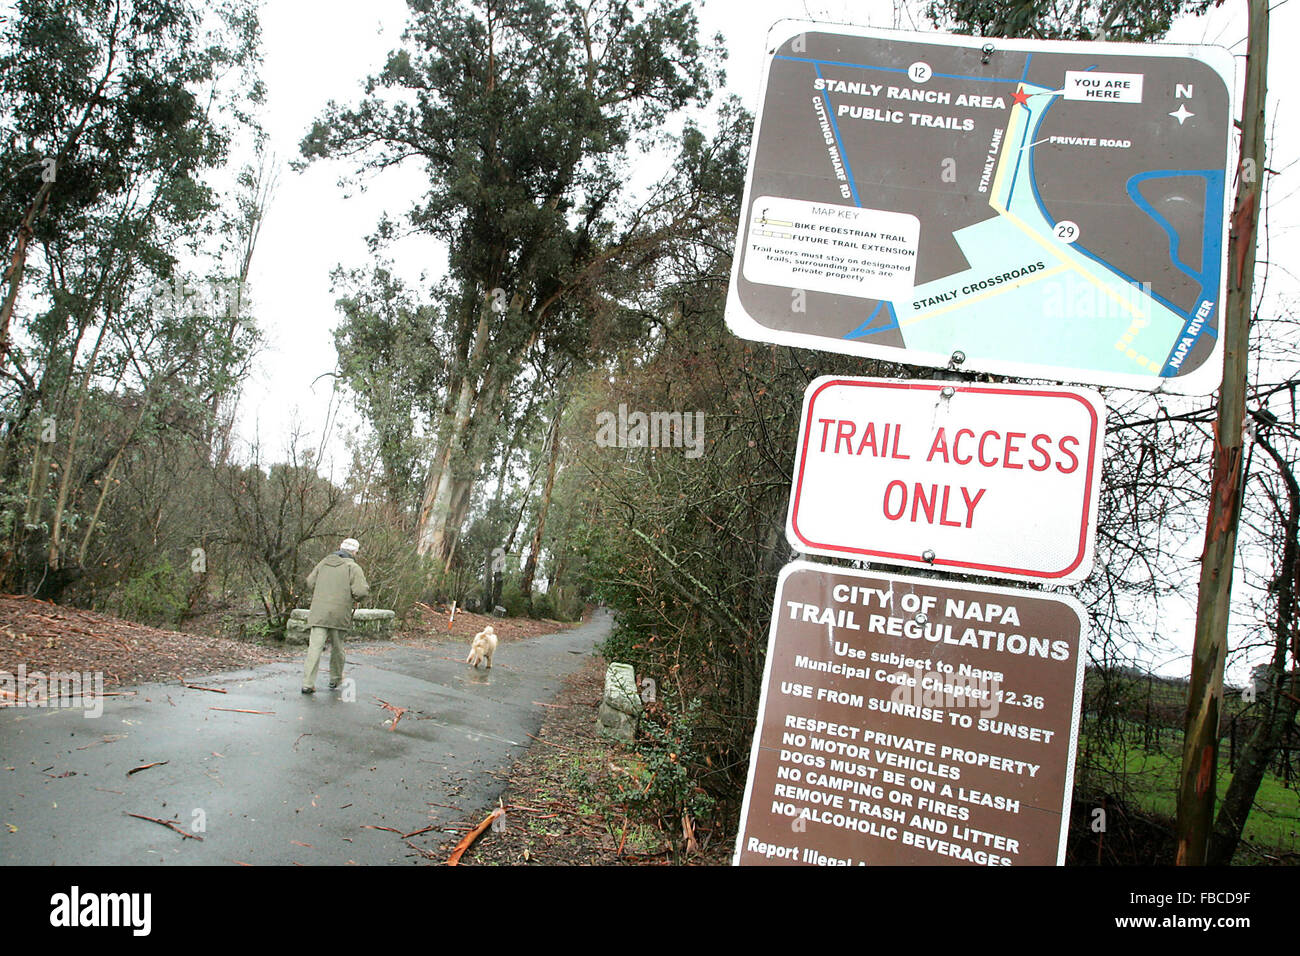 Napa, CA, USA. 6th Jan, 2016. Napa County supervisors are discussing the impact the Vine Trail will have on adjacent vineyards. This trail, near Stanly Lane, is not part of the Vine Trail but runs in close proximity to existing vineyards. © Napa Valley Register/ZUMA Wire/Alamy Live News Stock Photo